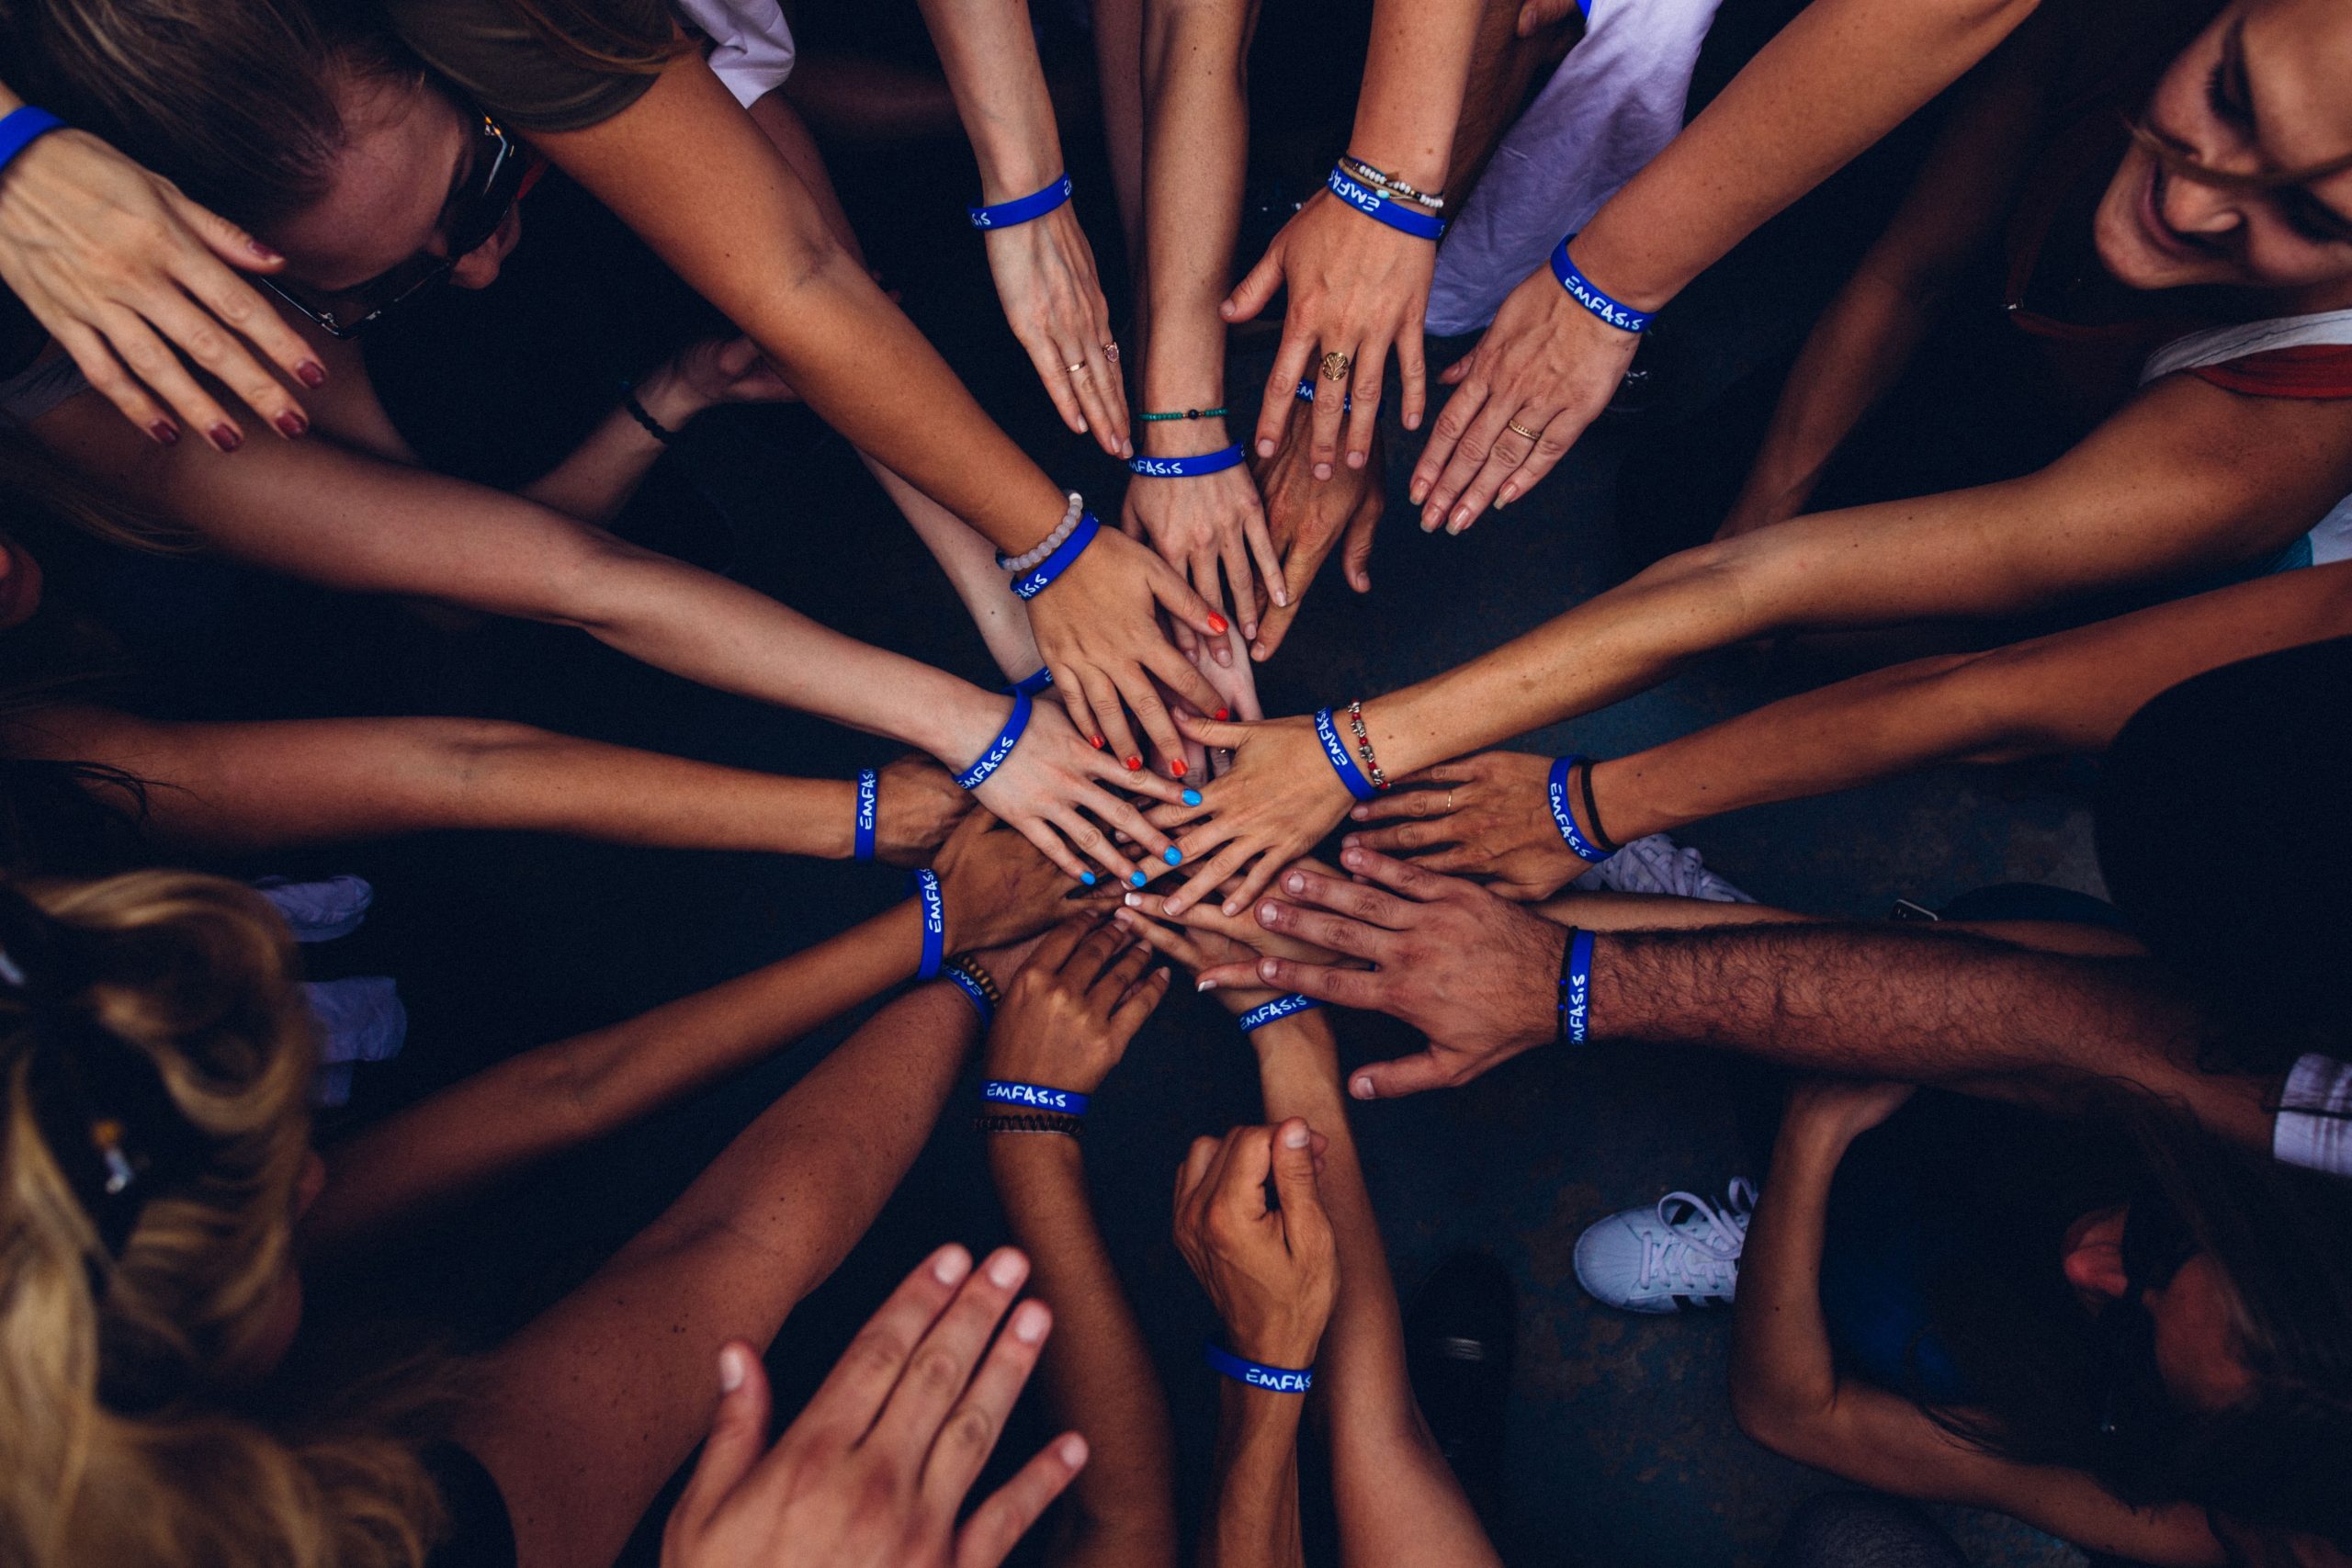 support groups aren't only for addicts circle of hands